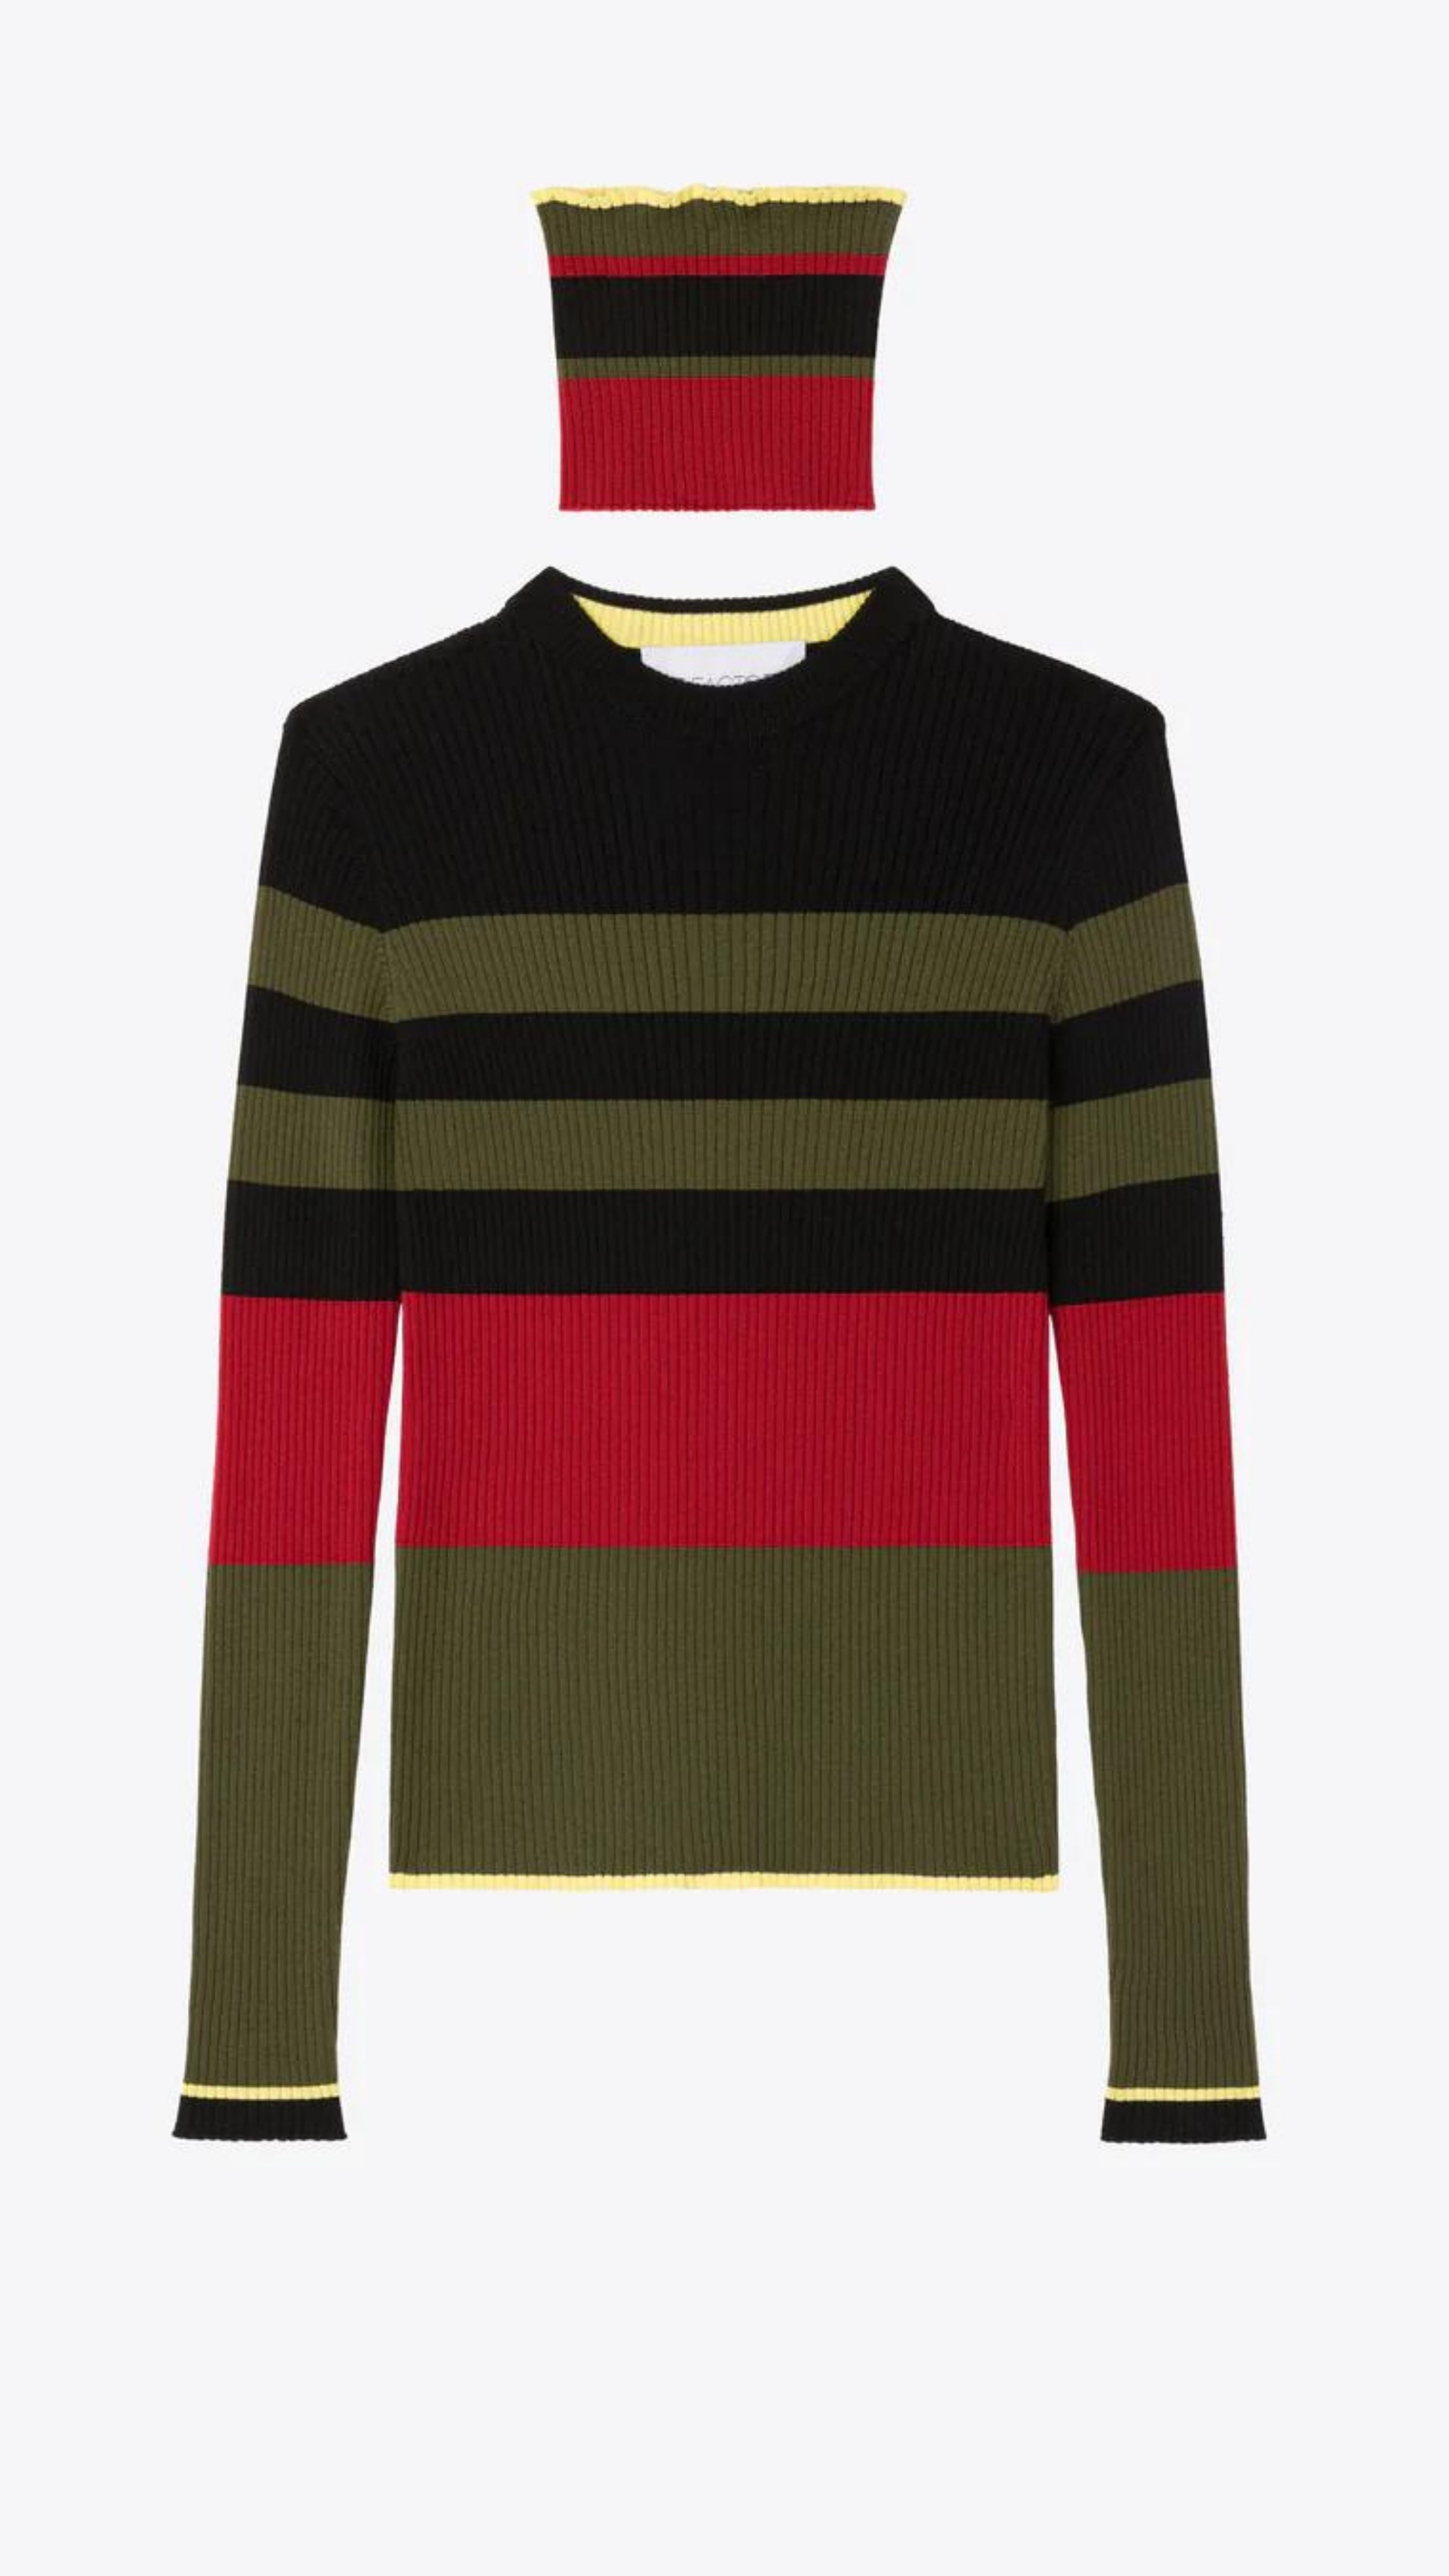 Colville AZ Factory Molly Molloy and Lucinda Chambers, Color Block Crewneck Sweater with Snood. Long sleeve sweater with crew neckline in varying stripes of black, olive and red with high light of yellow at bottom hem and cuffs. Shown with detachable snood scarf.